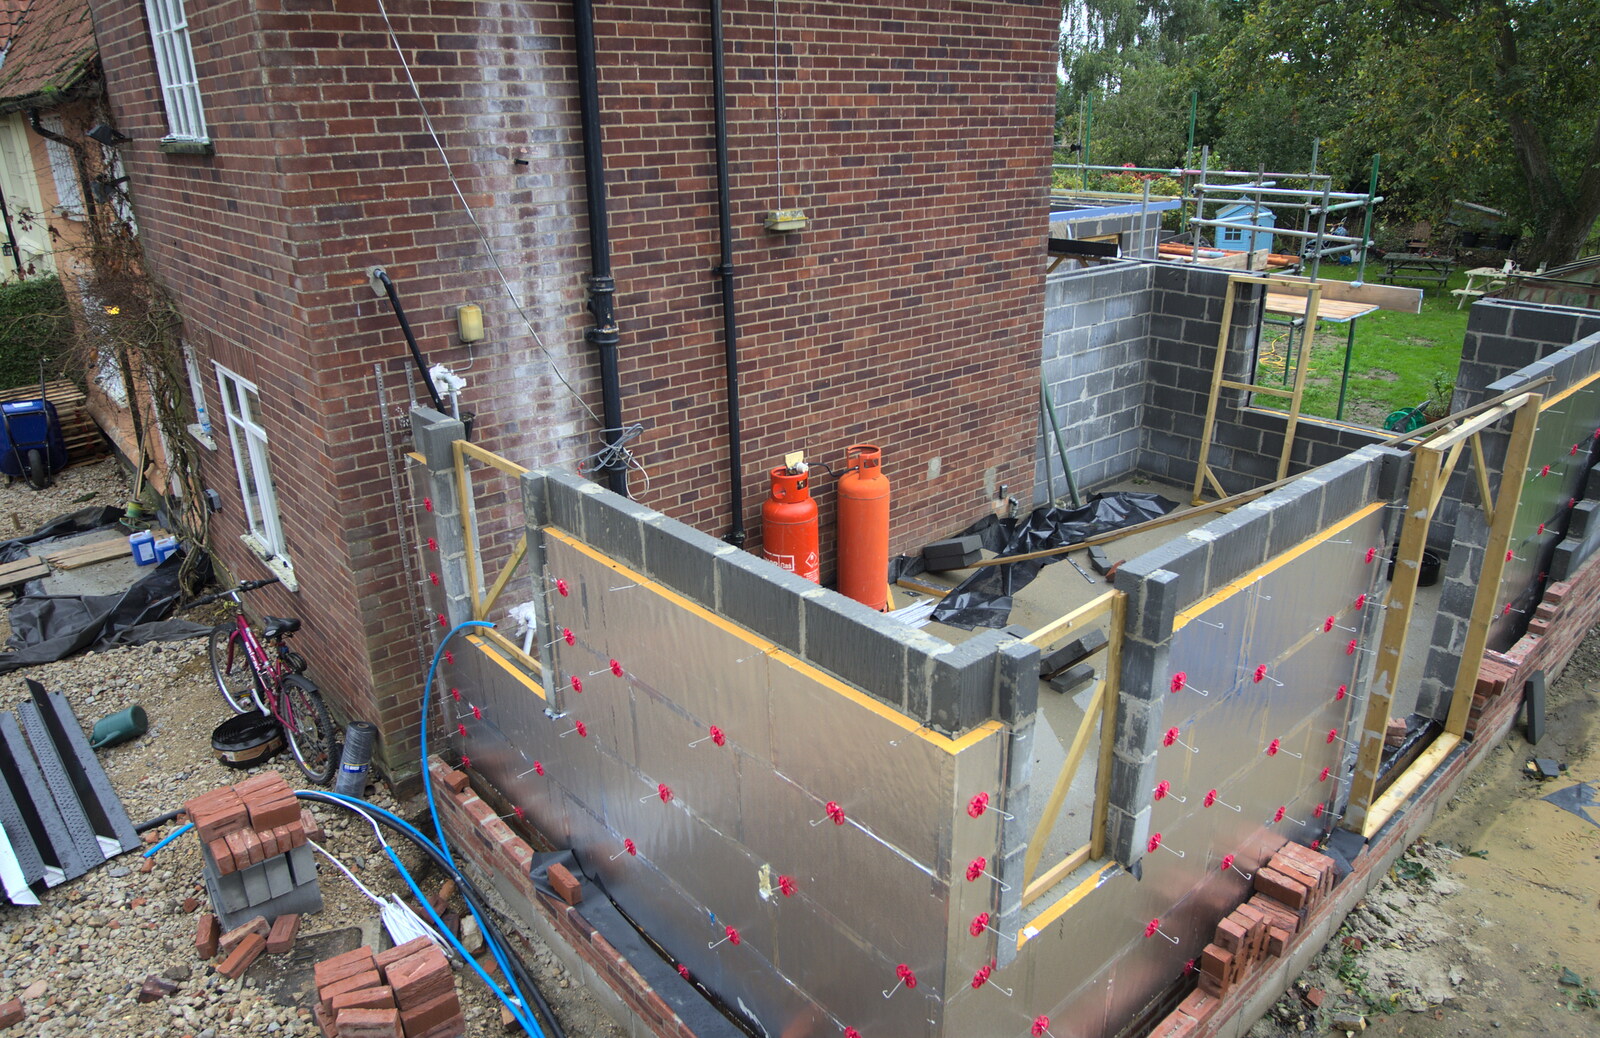 The side extension from A Building Site Update, Brome, Suffolk - 13th October 2013